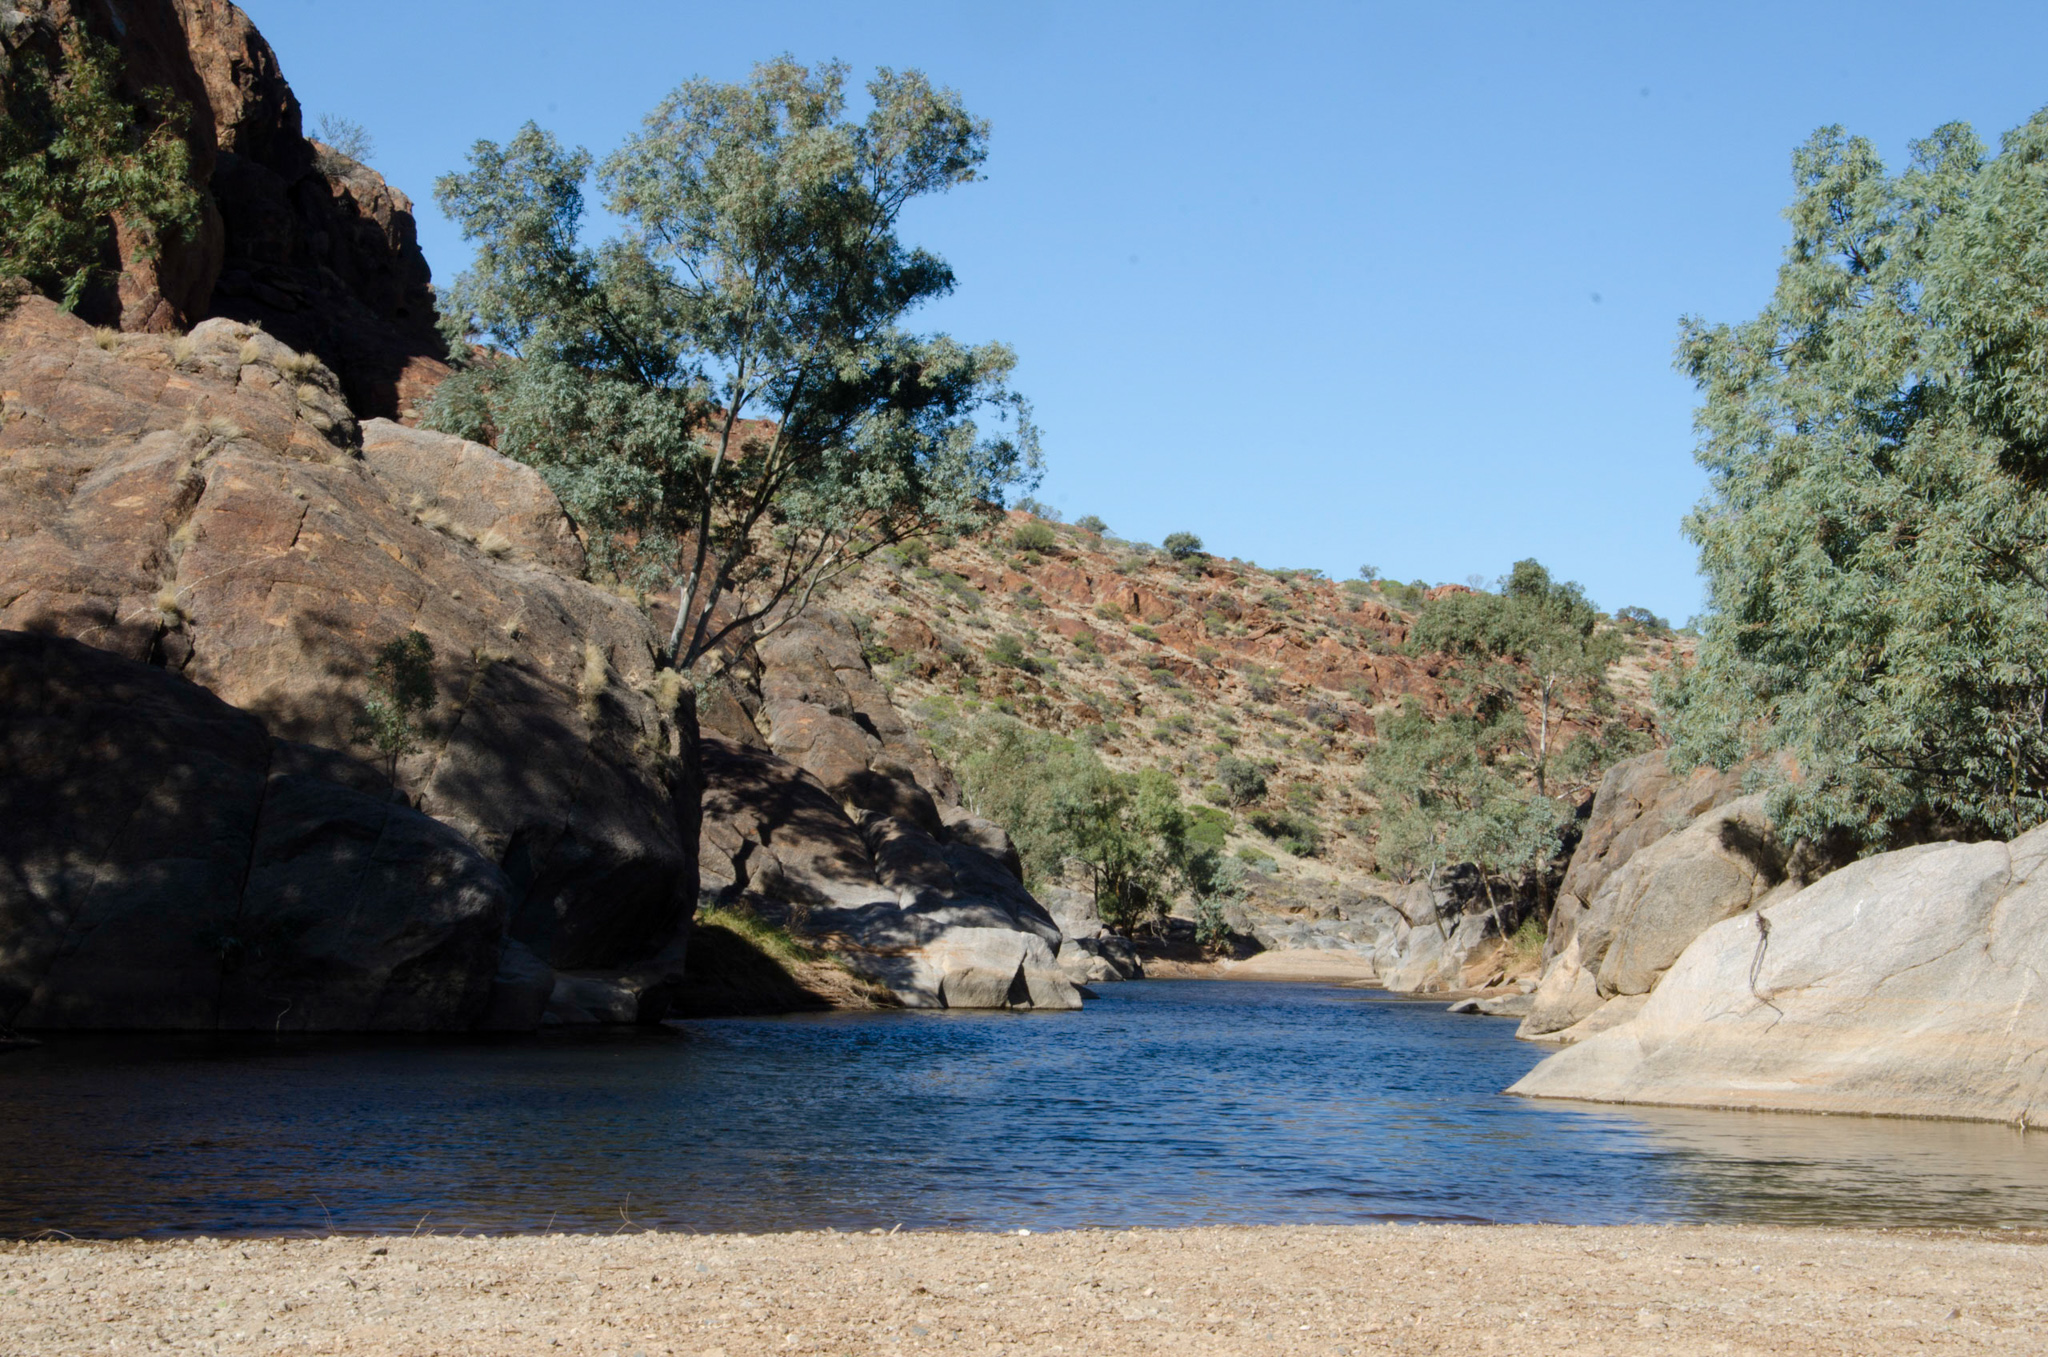 Analysis by researchers at CSIRO, Australia’s national science agency, have found areas in the Murray-Darling Basin suitable for long term underground water storage and could help build drought resilience. Source: CSIRO (Huw Morgan)